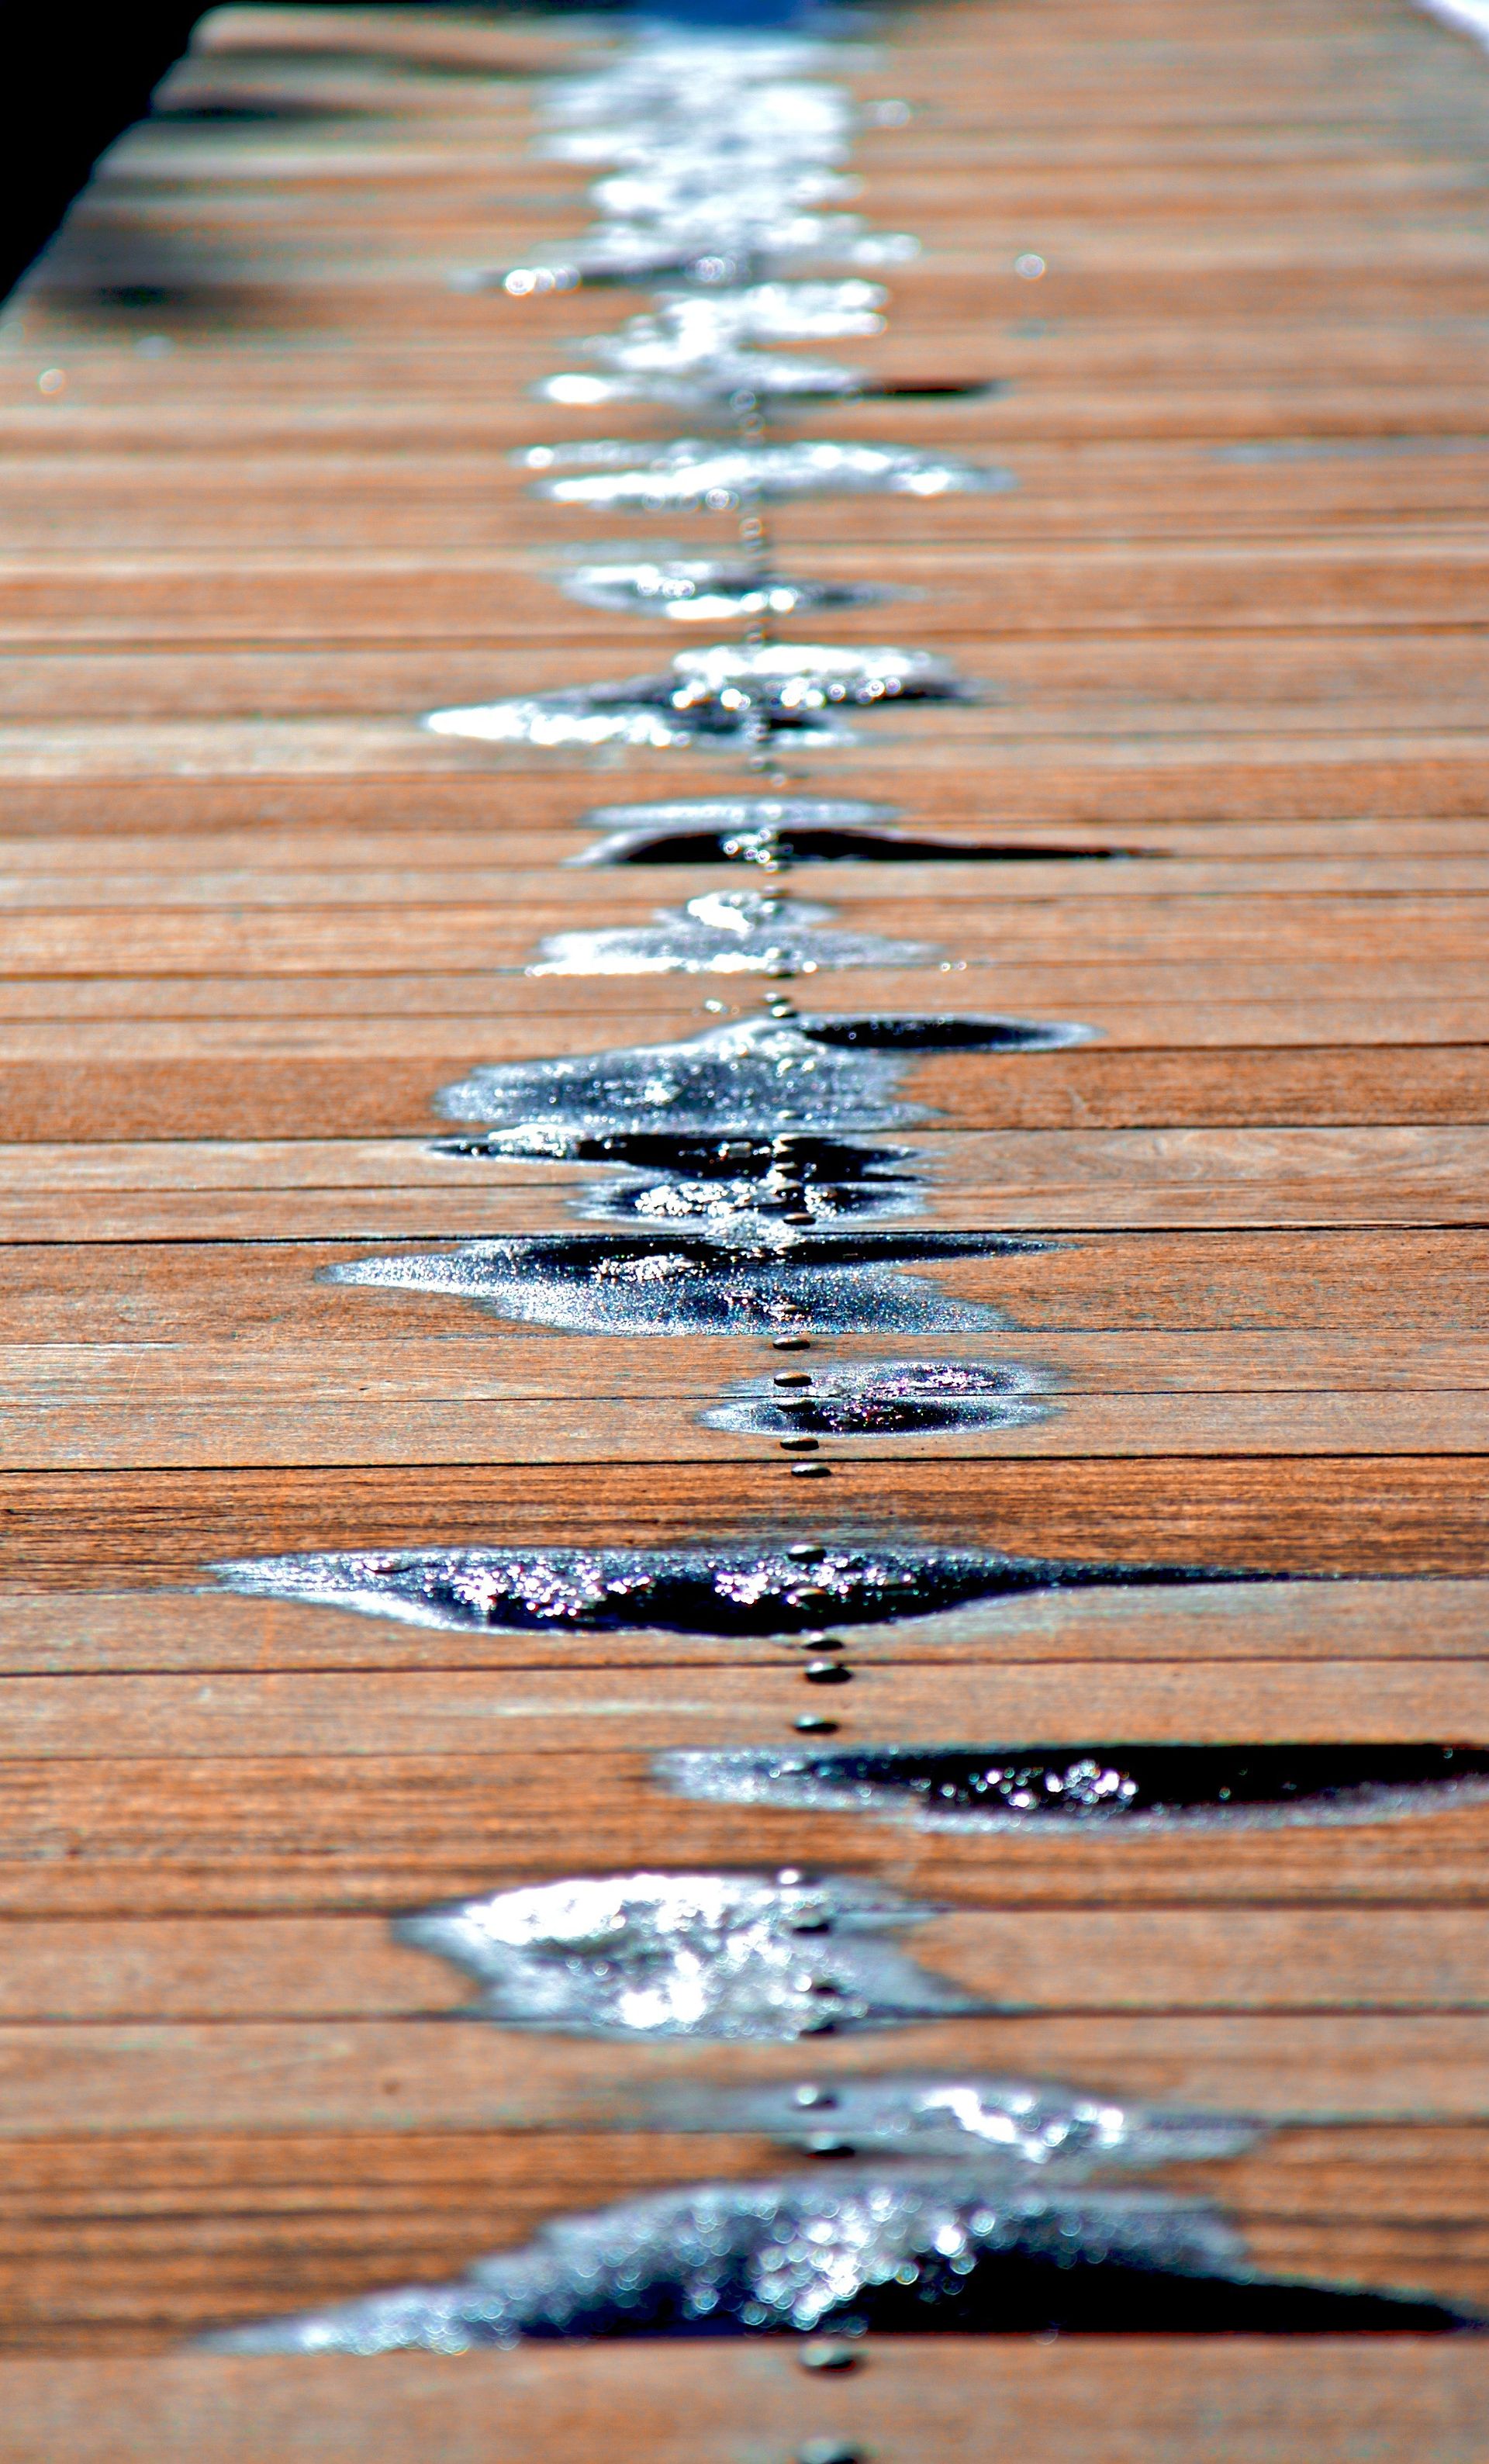 Patches of melting ice on a wooden path.